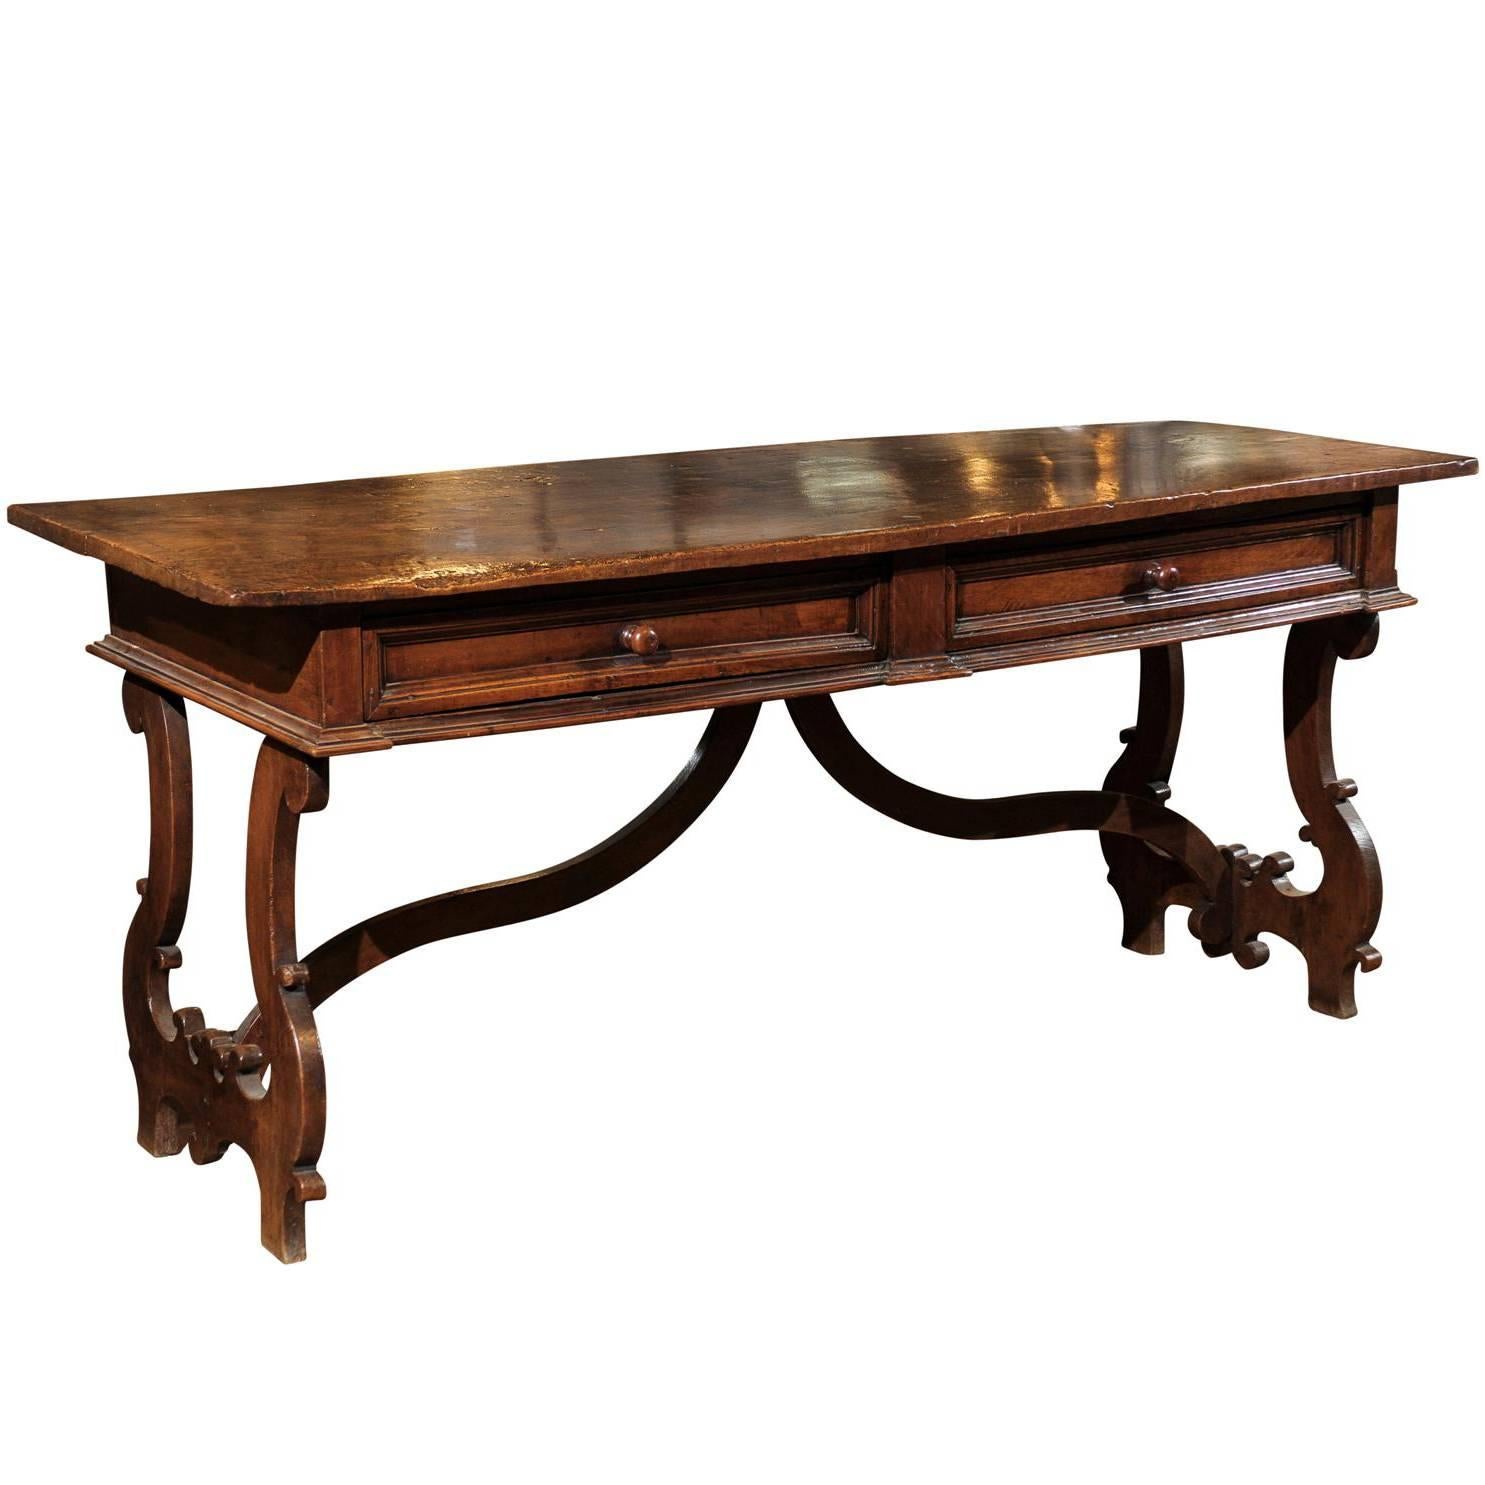 Italian Baroque Style 1890s Walnut Desk with Lyre Shaped Legs and Two Drawers